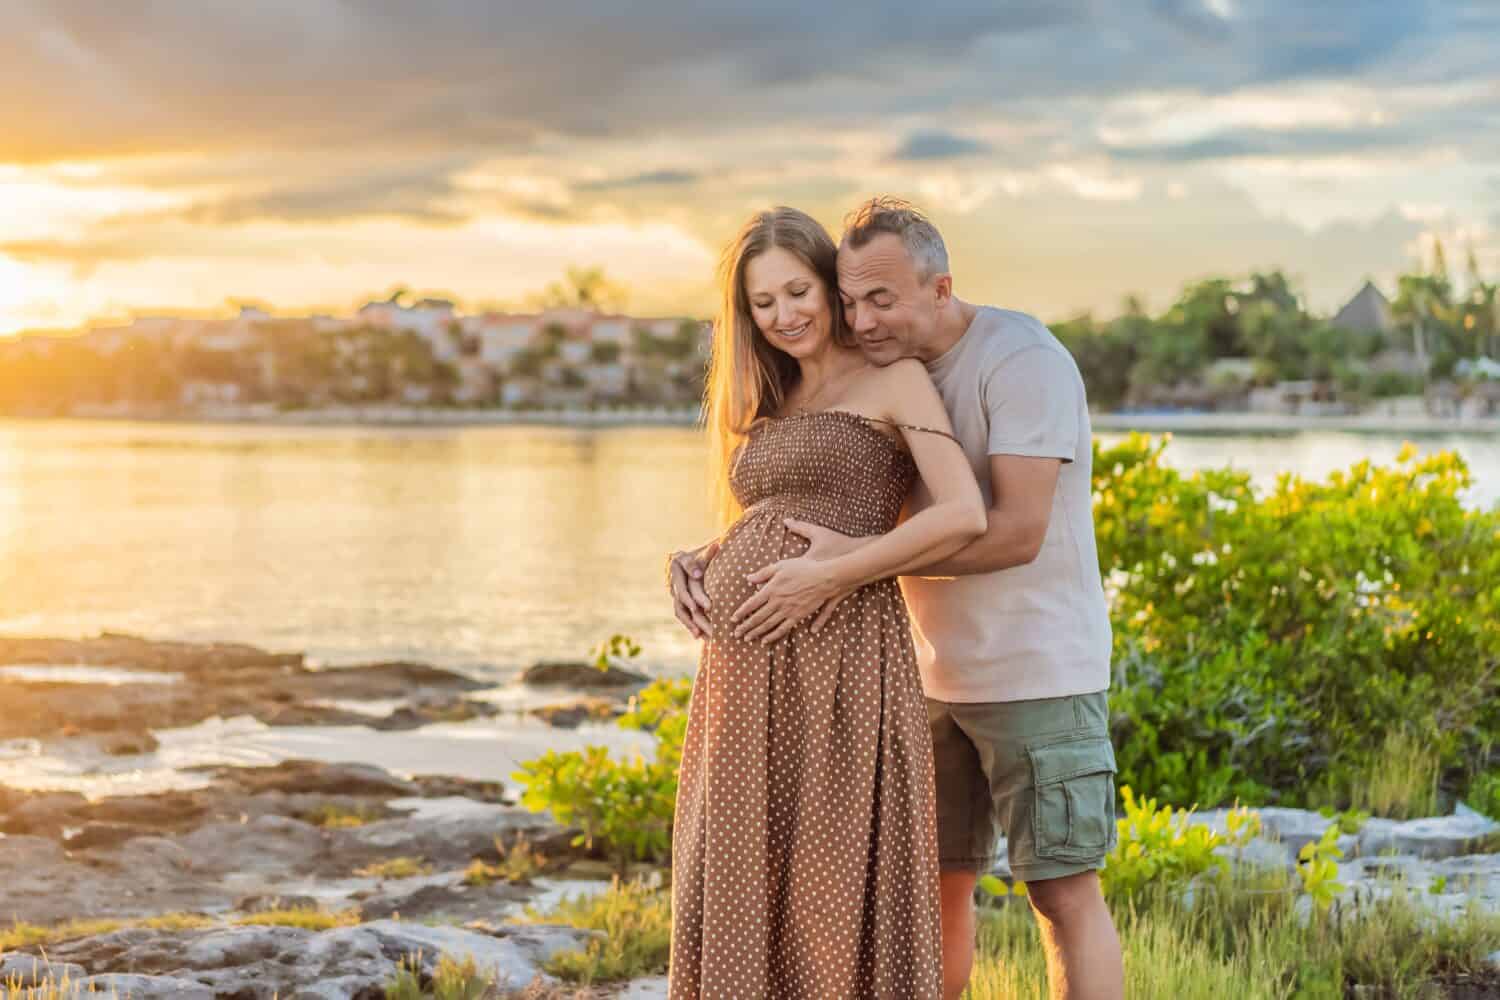 A happy, mature couple over 40, enjoying a leisurely walk on the waterfront On the Sunset, their joy evident as they embrace the journey of pregnancy later in life